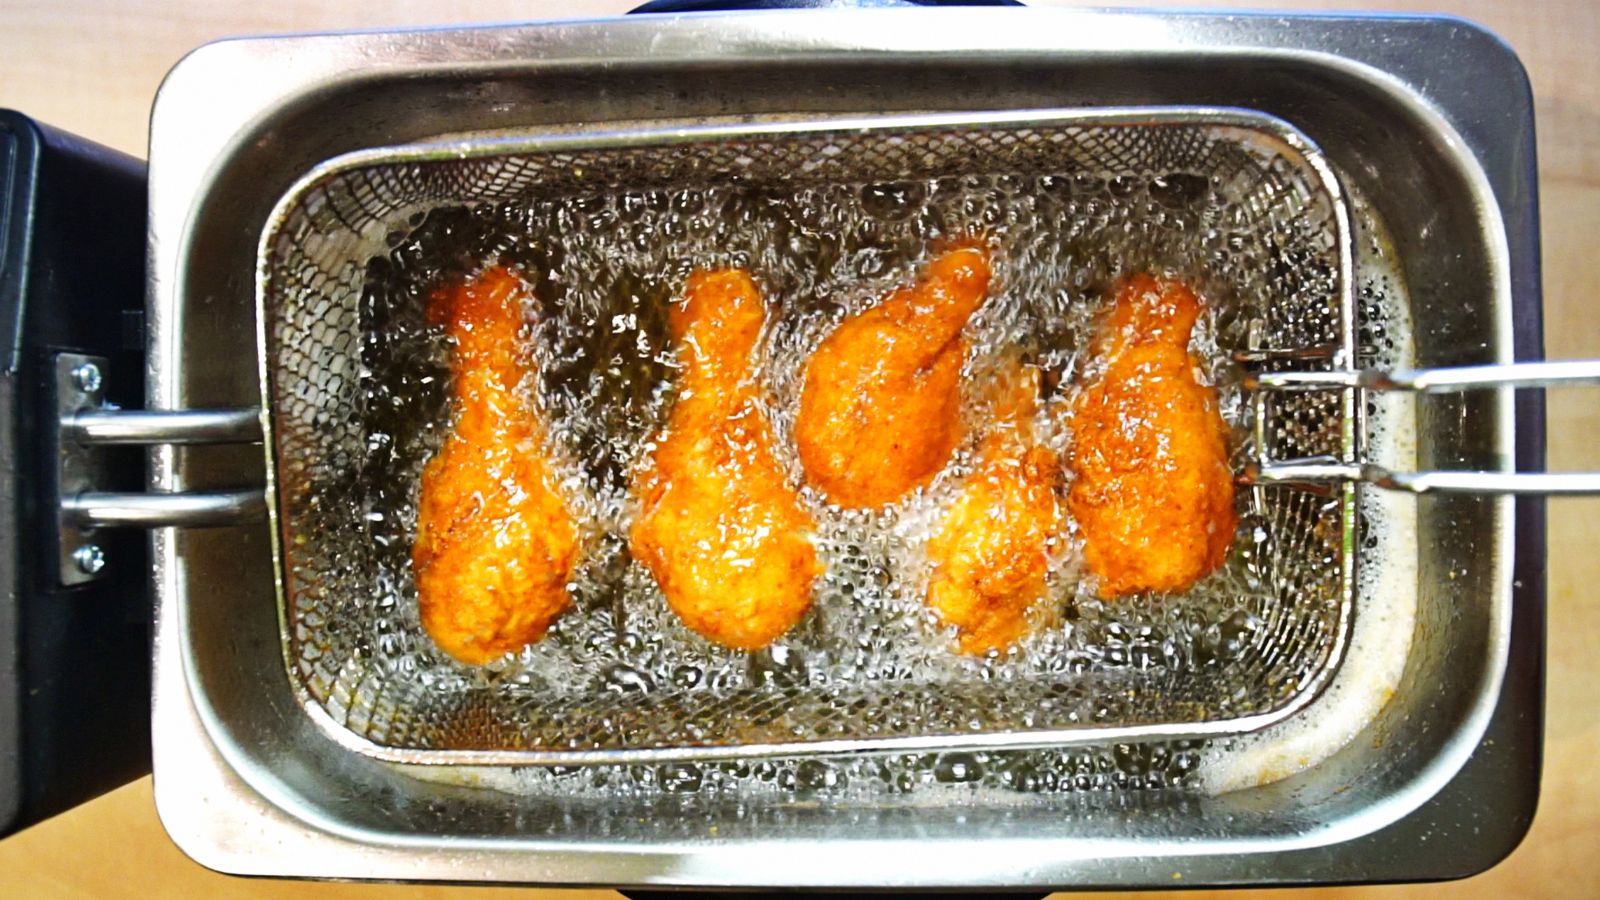 Frying raw chicken in oil and reusing it - familyguidecentral.com